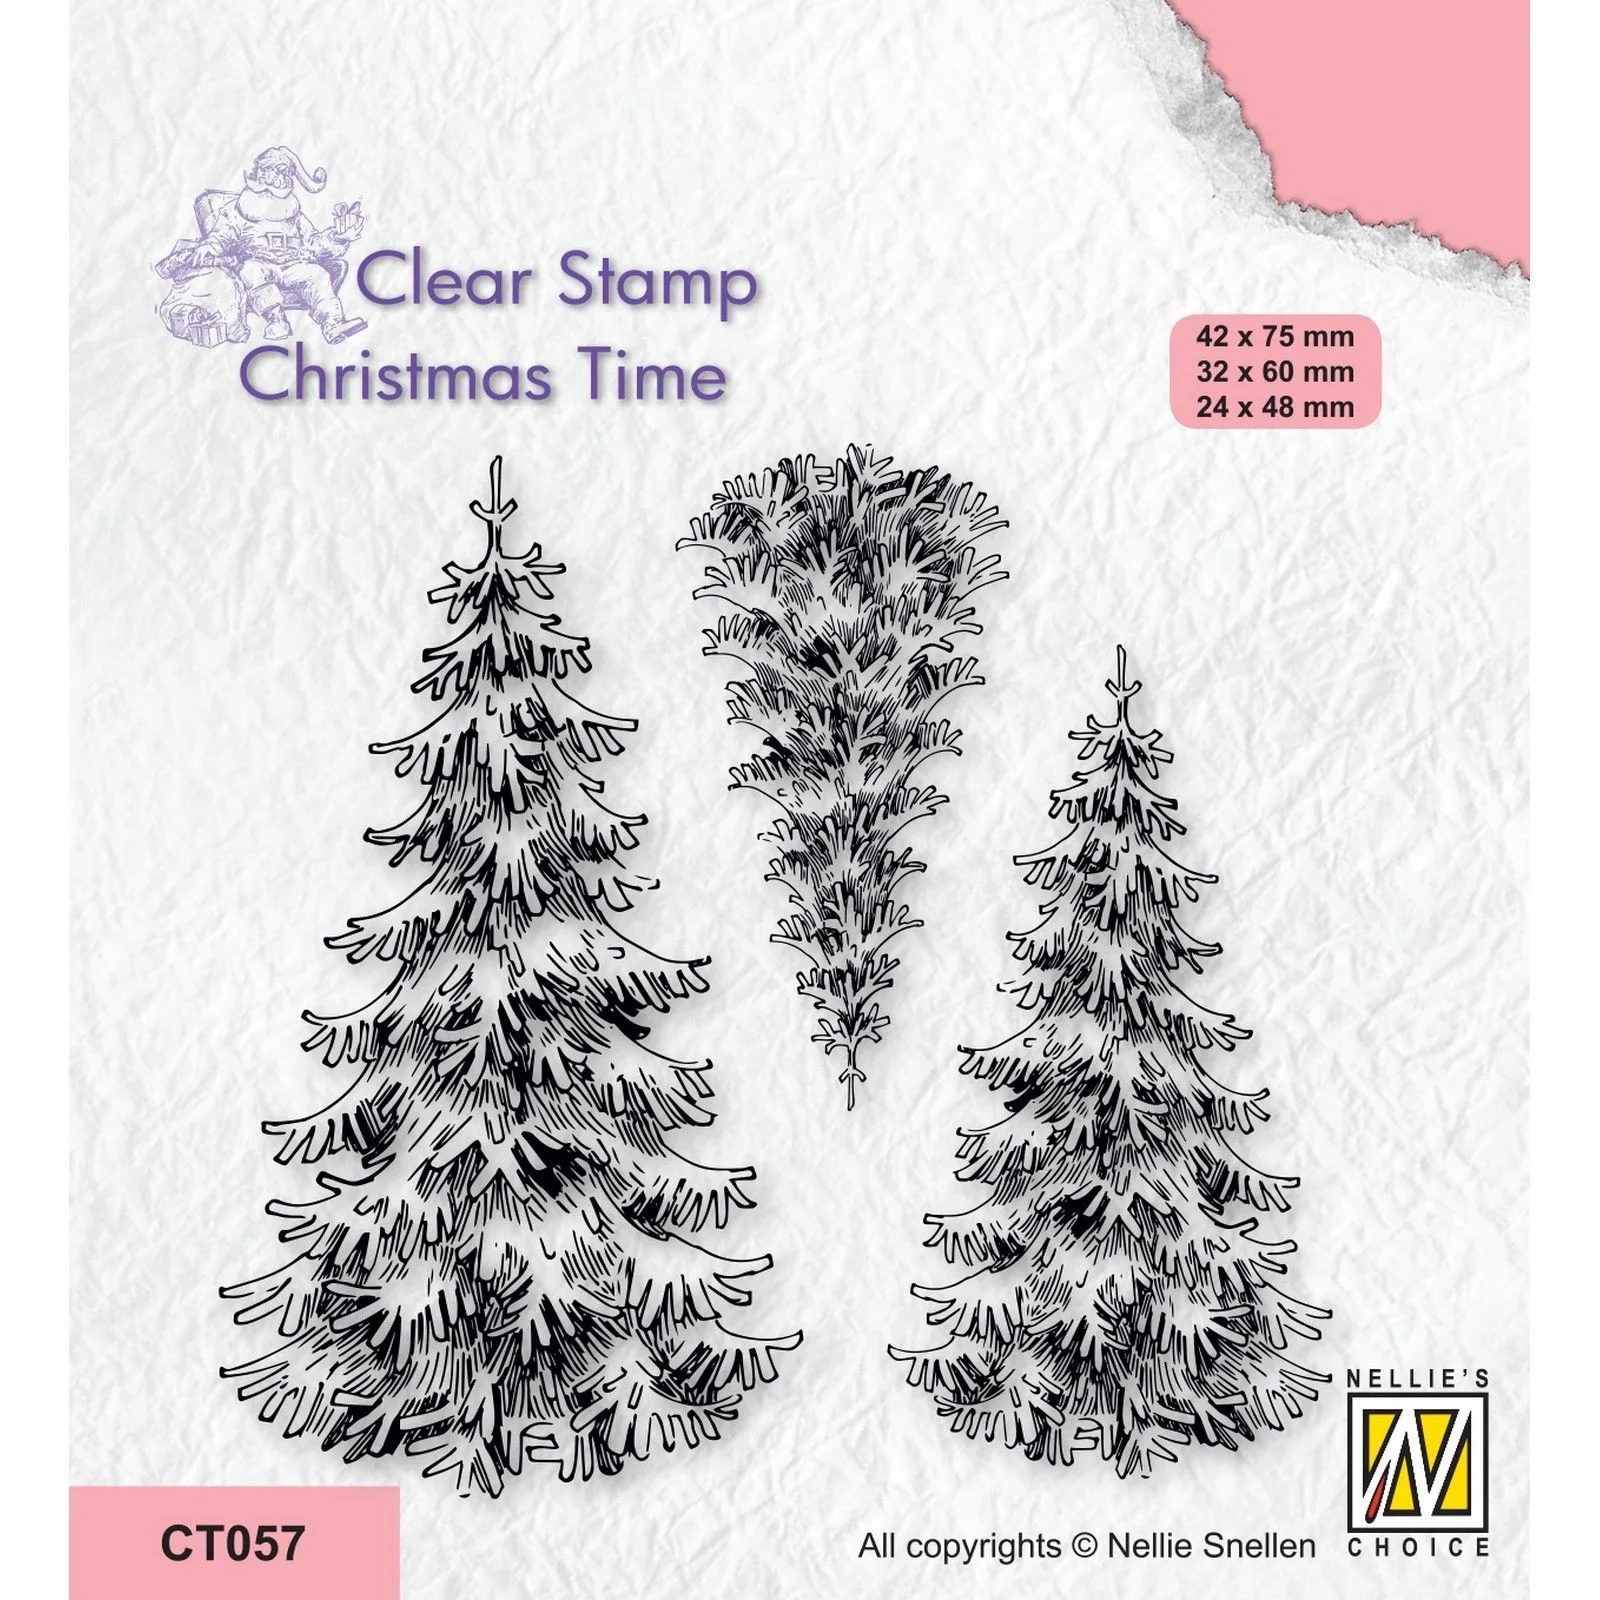 Nellie Snellen Clear Stamp Christmas Time - 3 Snowy Fir Trees